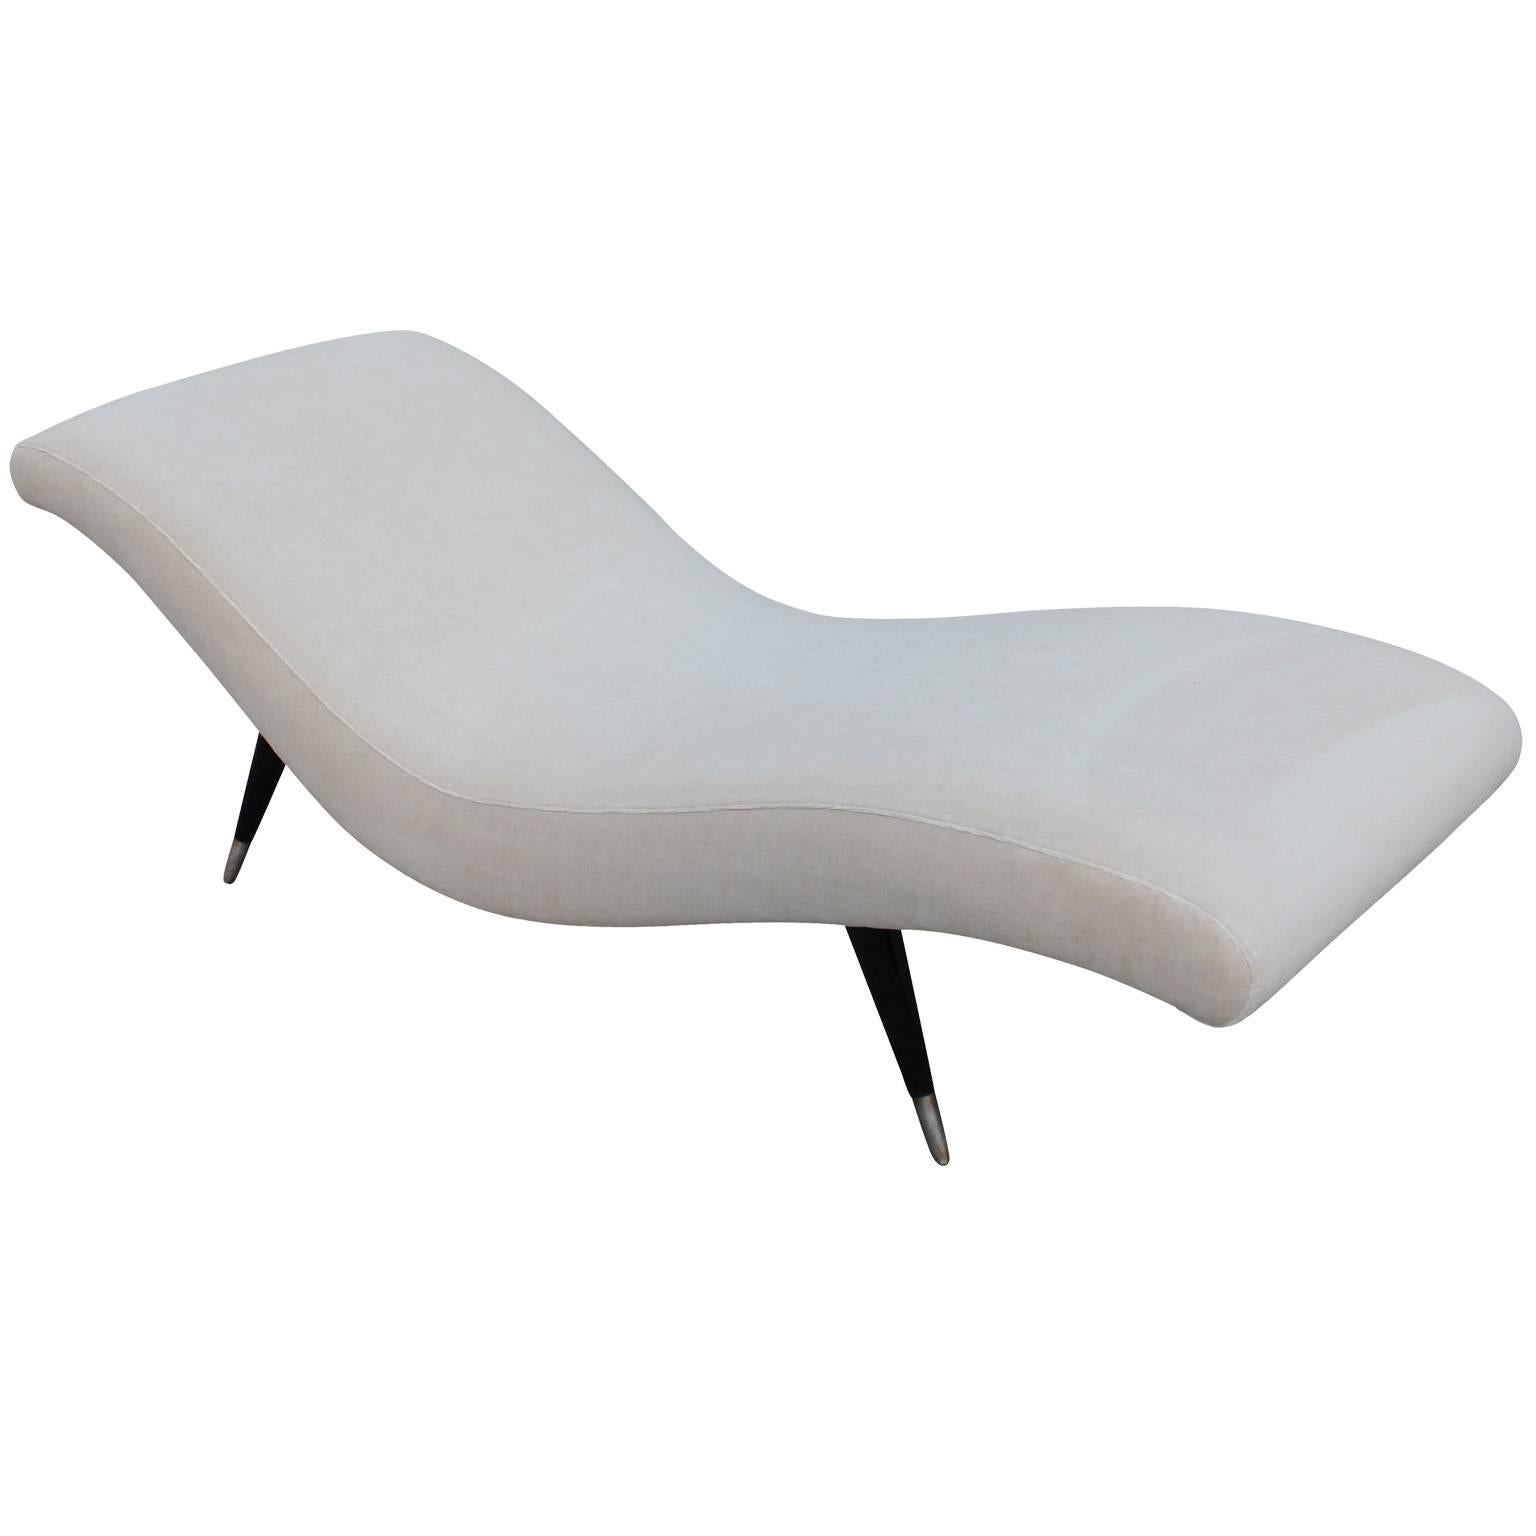 Stunning chaise lounge in cream color velvet. Chaise rests on four tapered and splayed legs in shiny black lacquer with heavily patinaed brushed metal caps. The swooping lines of the chaise are accentuated with delicate piping.  